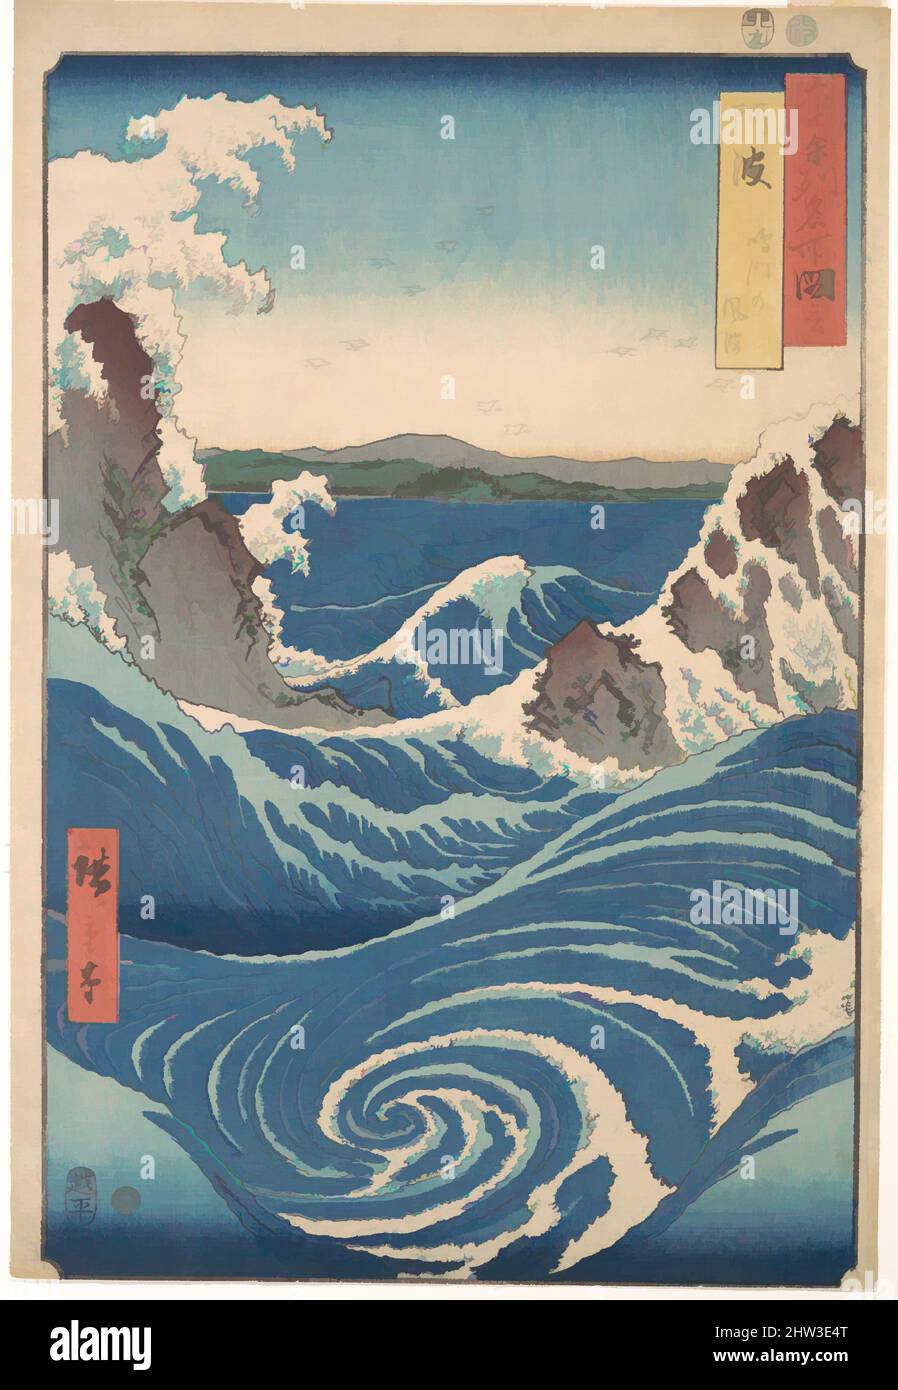 Art inspired by 六十余州名所図会　阿波　鳴門の風波, Naruto Whirlpool, Awa Province, from the series Views of Famous Places in the Sixty-Odd Provinces, Edo period (1615–1868), ca. 1853, Japan, Polychrome woodblock print; ink and color on paper, Oban tate-e 14 x 9 5/8 in. (35.6 x 24.4 cm), Prints, Classic works modernized by Artotop with a splash of modernity. Shapes, color and value, eye-catching visual impact on art. Emotions through freedom of artworks in a contemporary way. A timeless message pursuing a wildly creative new direction. Artists turning to the digital medium and creating the Artotop NFT Stock Photo